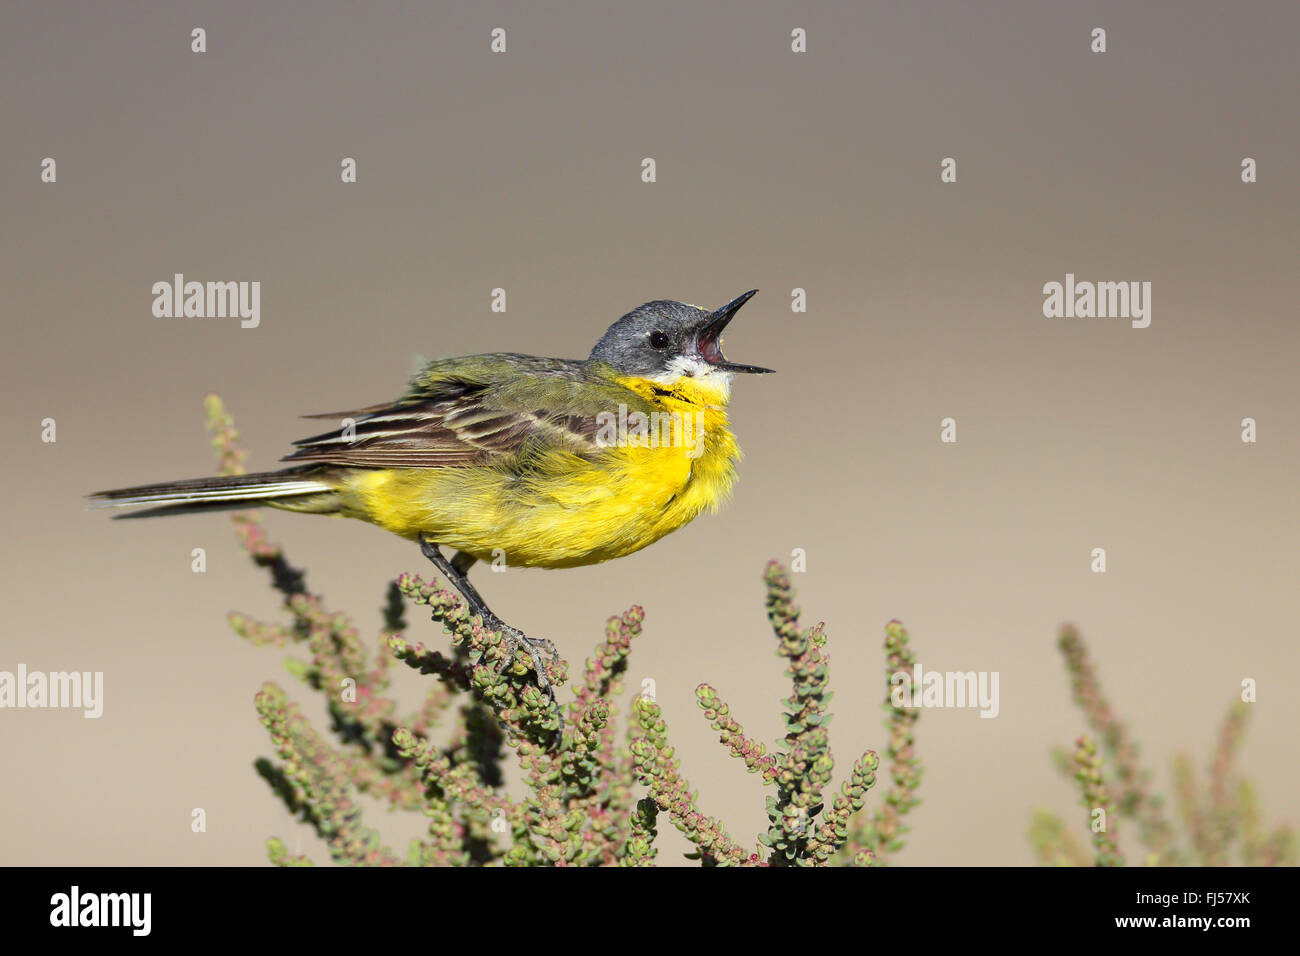 Ashy-headed Wagtail, Yellow wagtail (Motacilla flava cinereocapilla), calling male sitting on a succulent shrub, France, Camargue Stock Photo